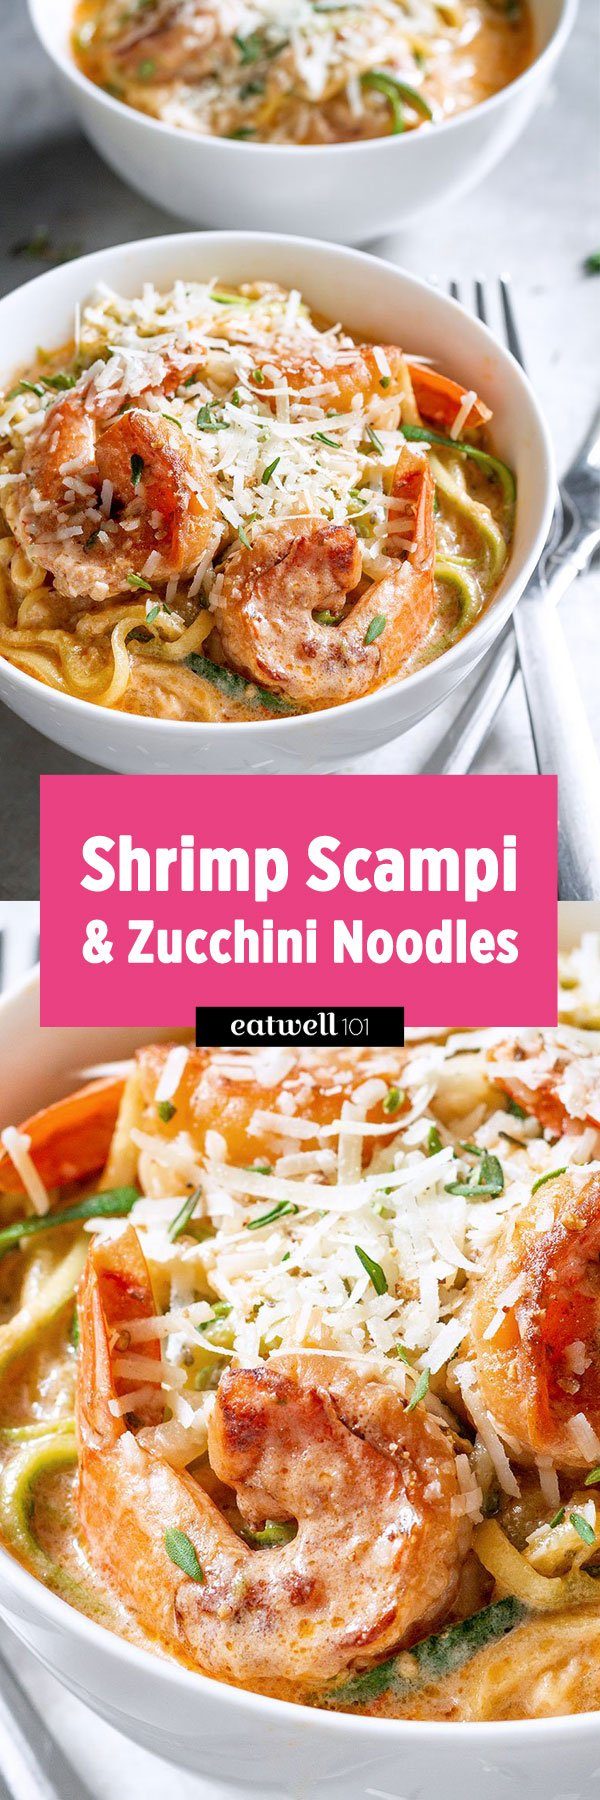 Creamy Shrimp Scampi with Zucchini Noodles - #shrimp #eatwell101 #recipe - This quick dinner is unbelievably easy and healthy, perfect for a busy weeknight!